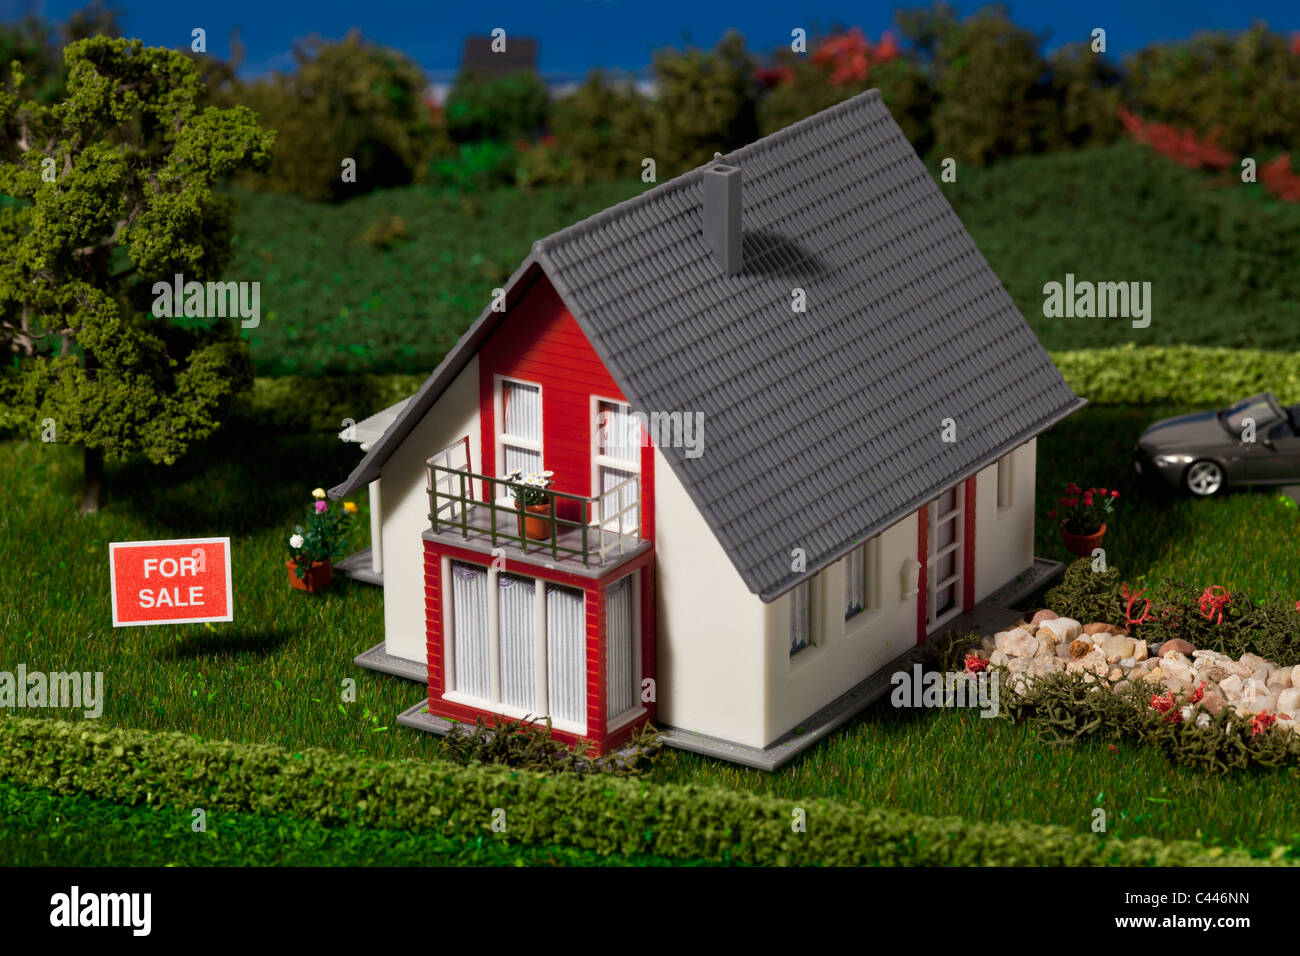 A diorama of a miniature house with a FOR SALE sign Stock Photo